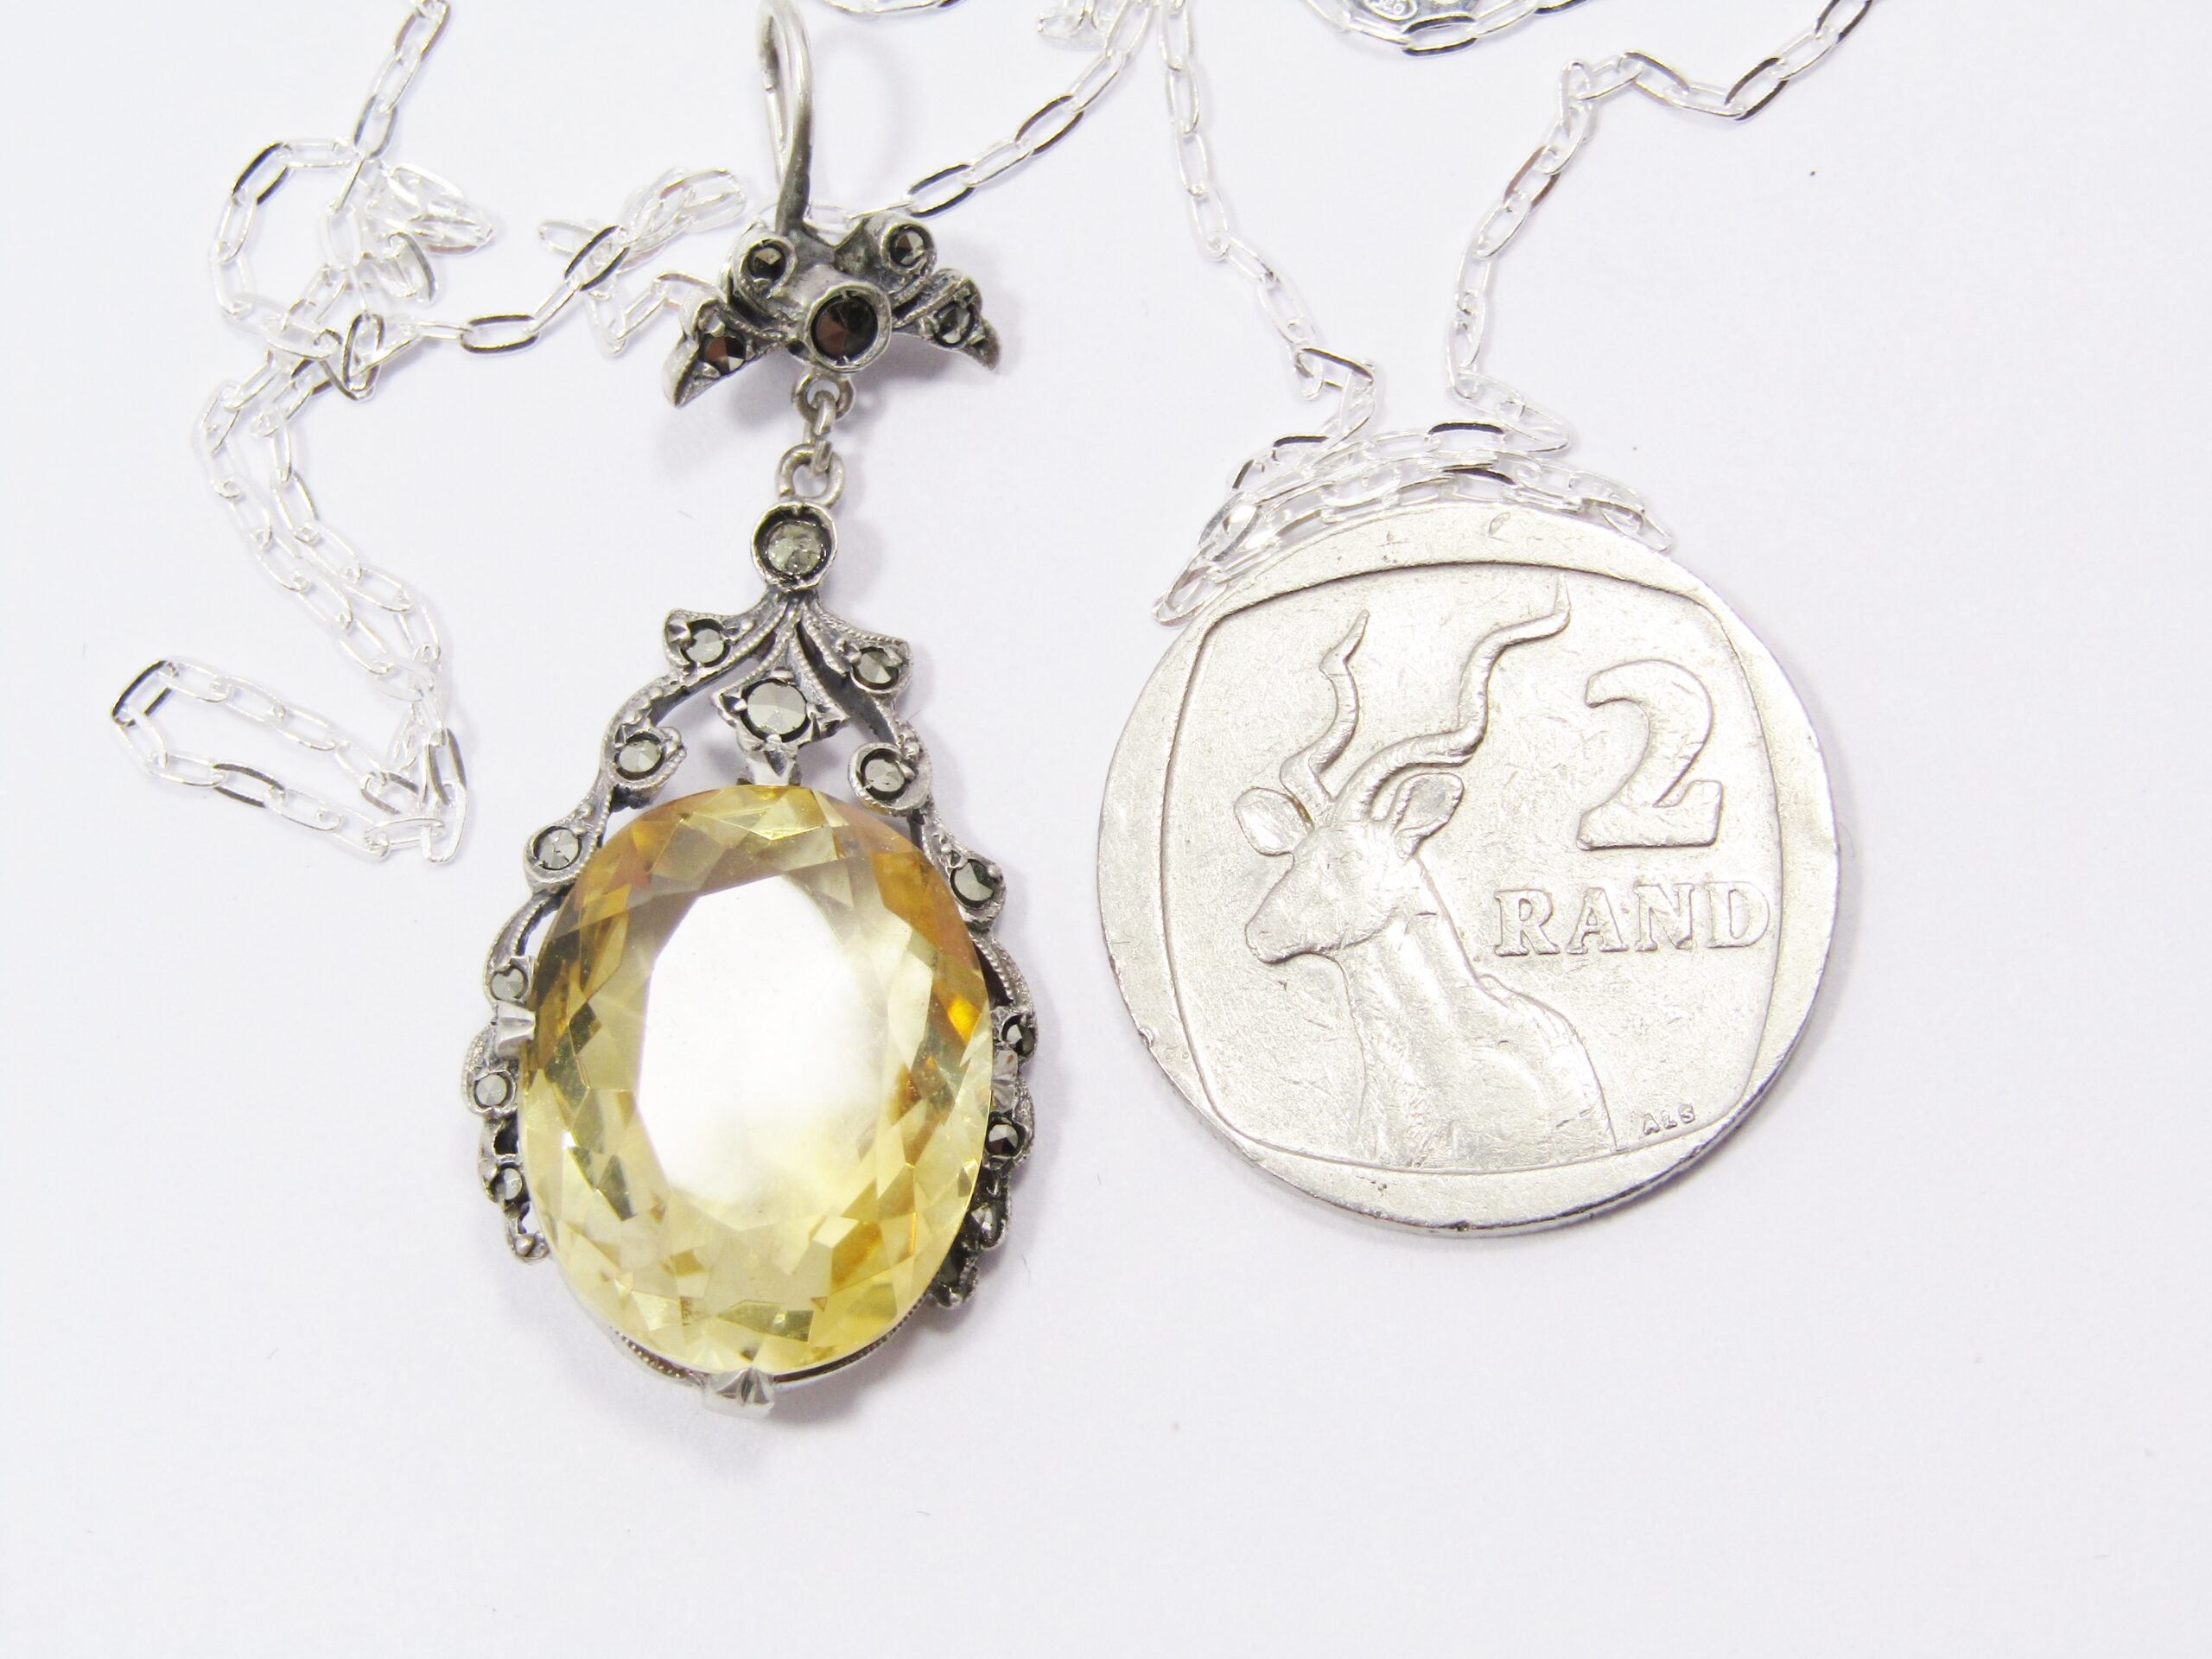 An Amazing Vintage Citrine and Marcasite Necklace on Chain in Sterling Silver